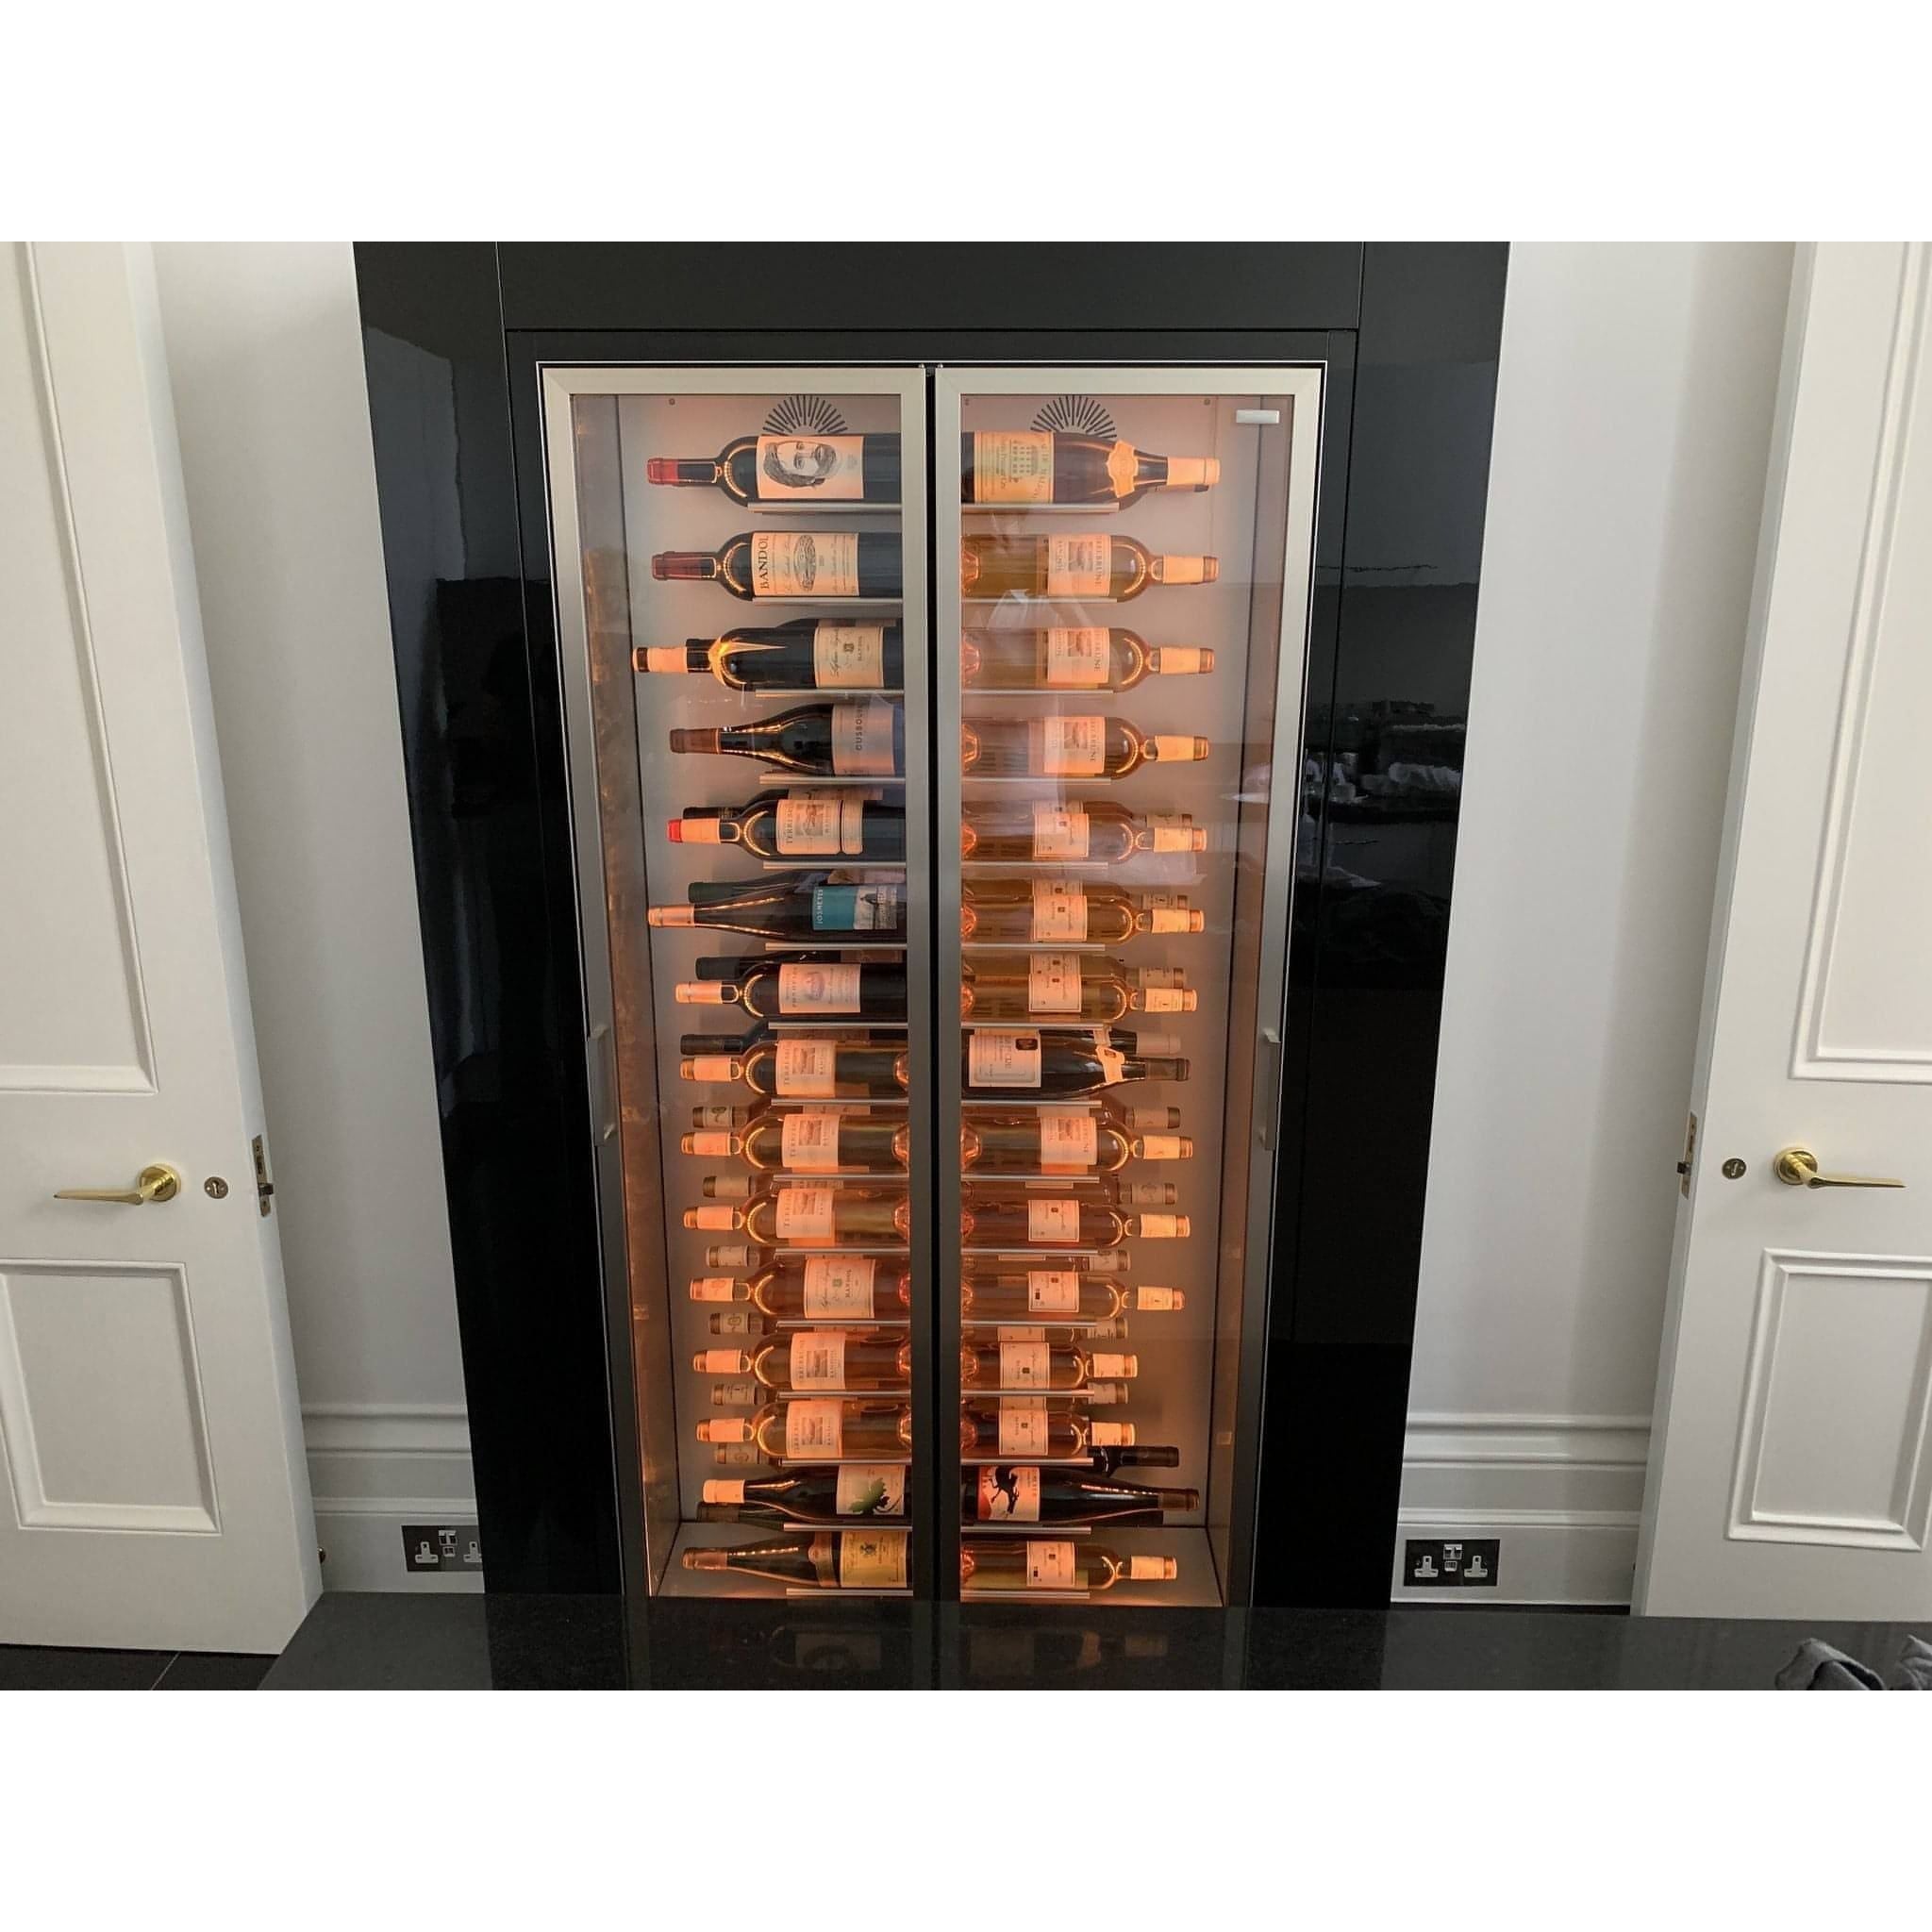 Mod 10 - Built in / Freestanding Wine Wall MD-10 - For Home Use